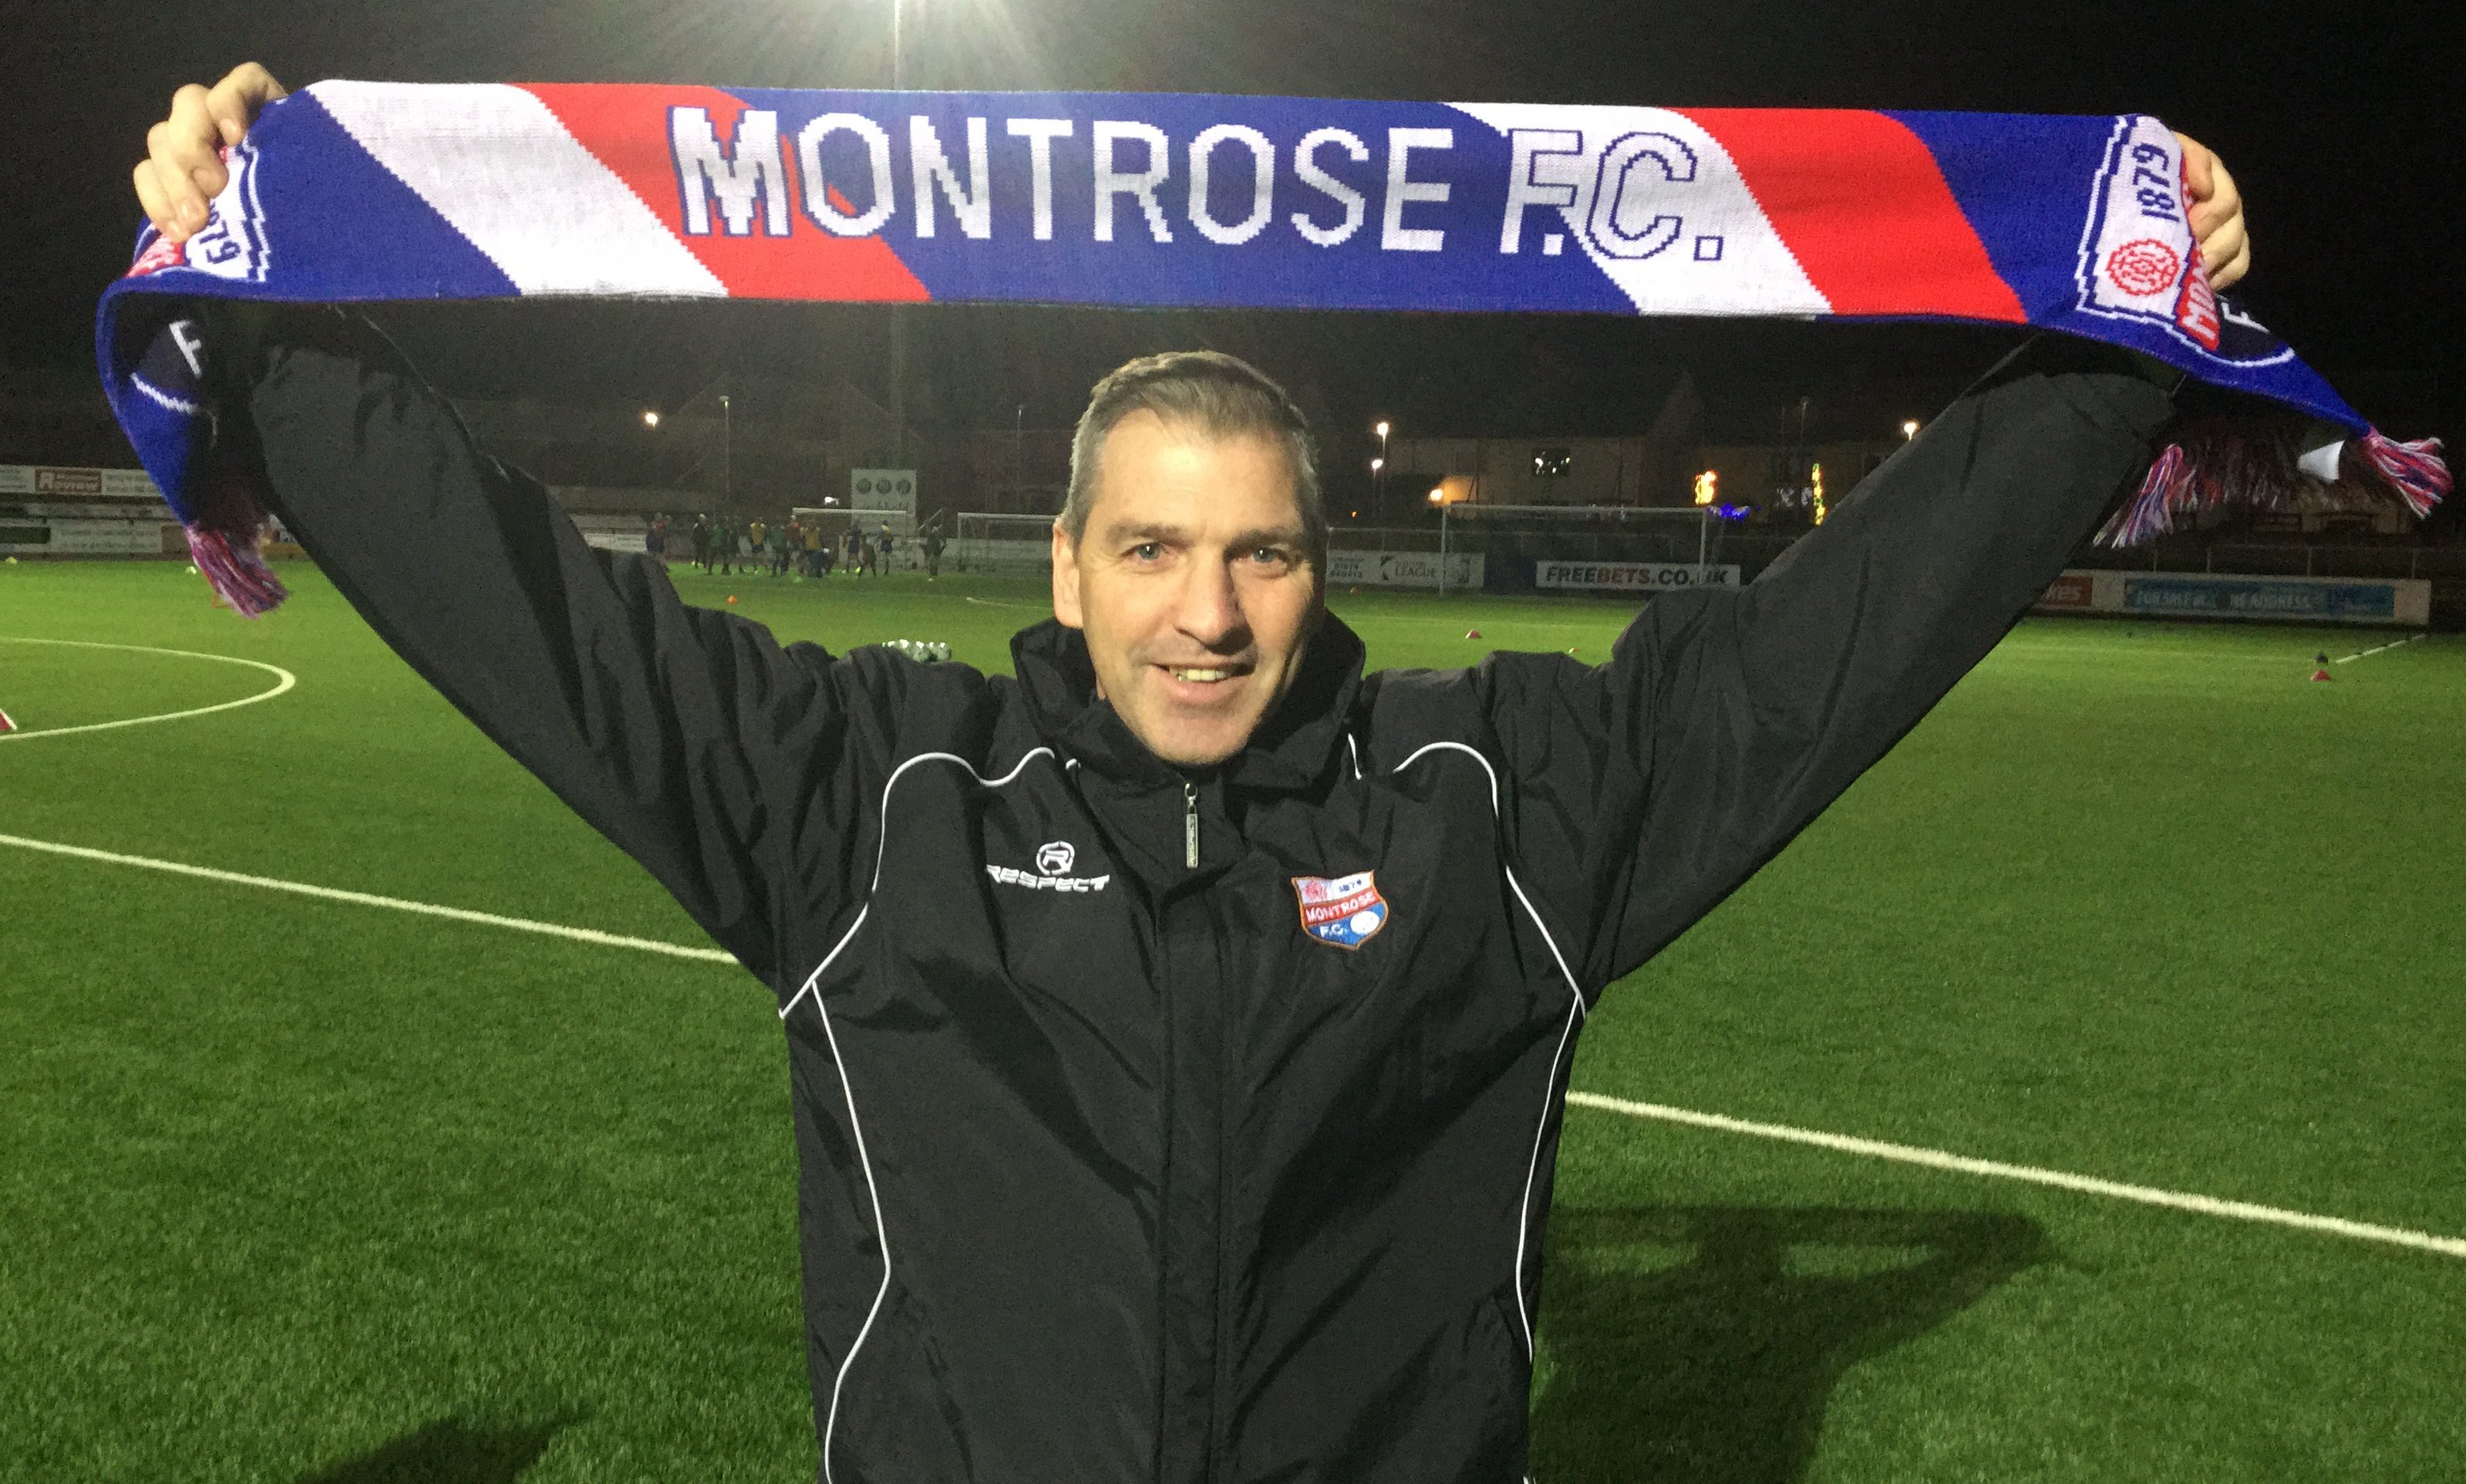 Stewart Petrie, pictured in 2016, when he was first unveiled at Montrose.